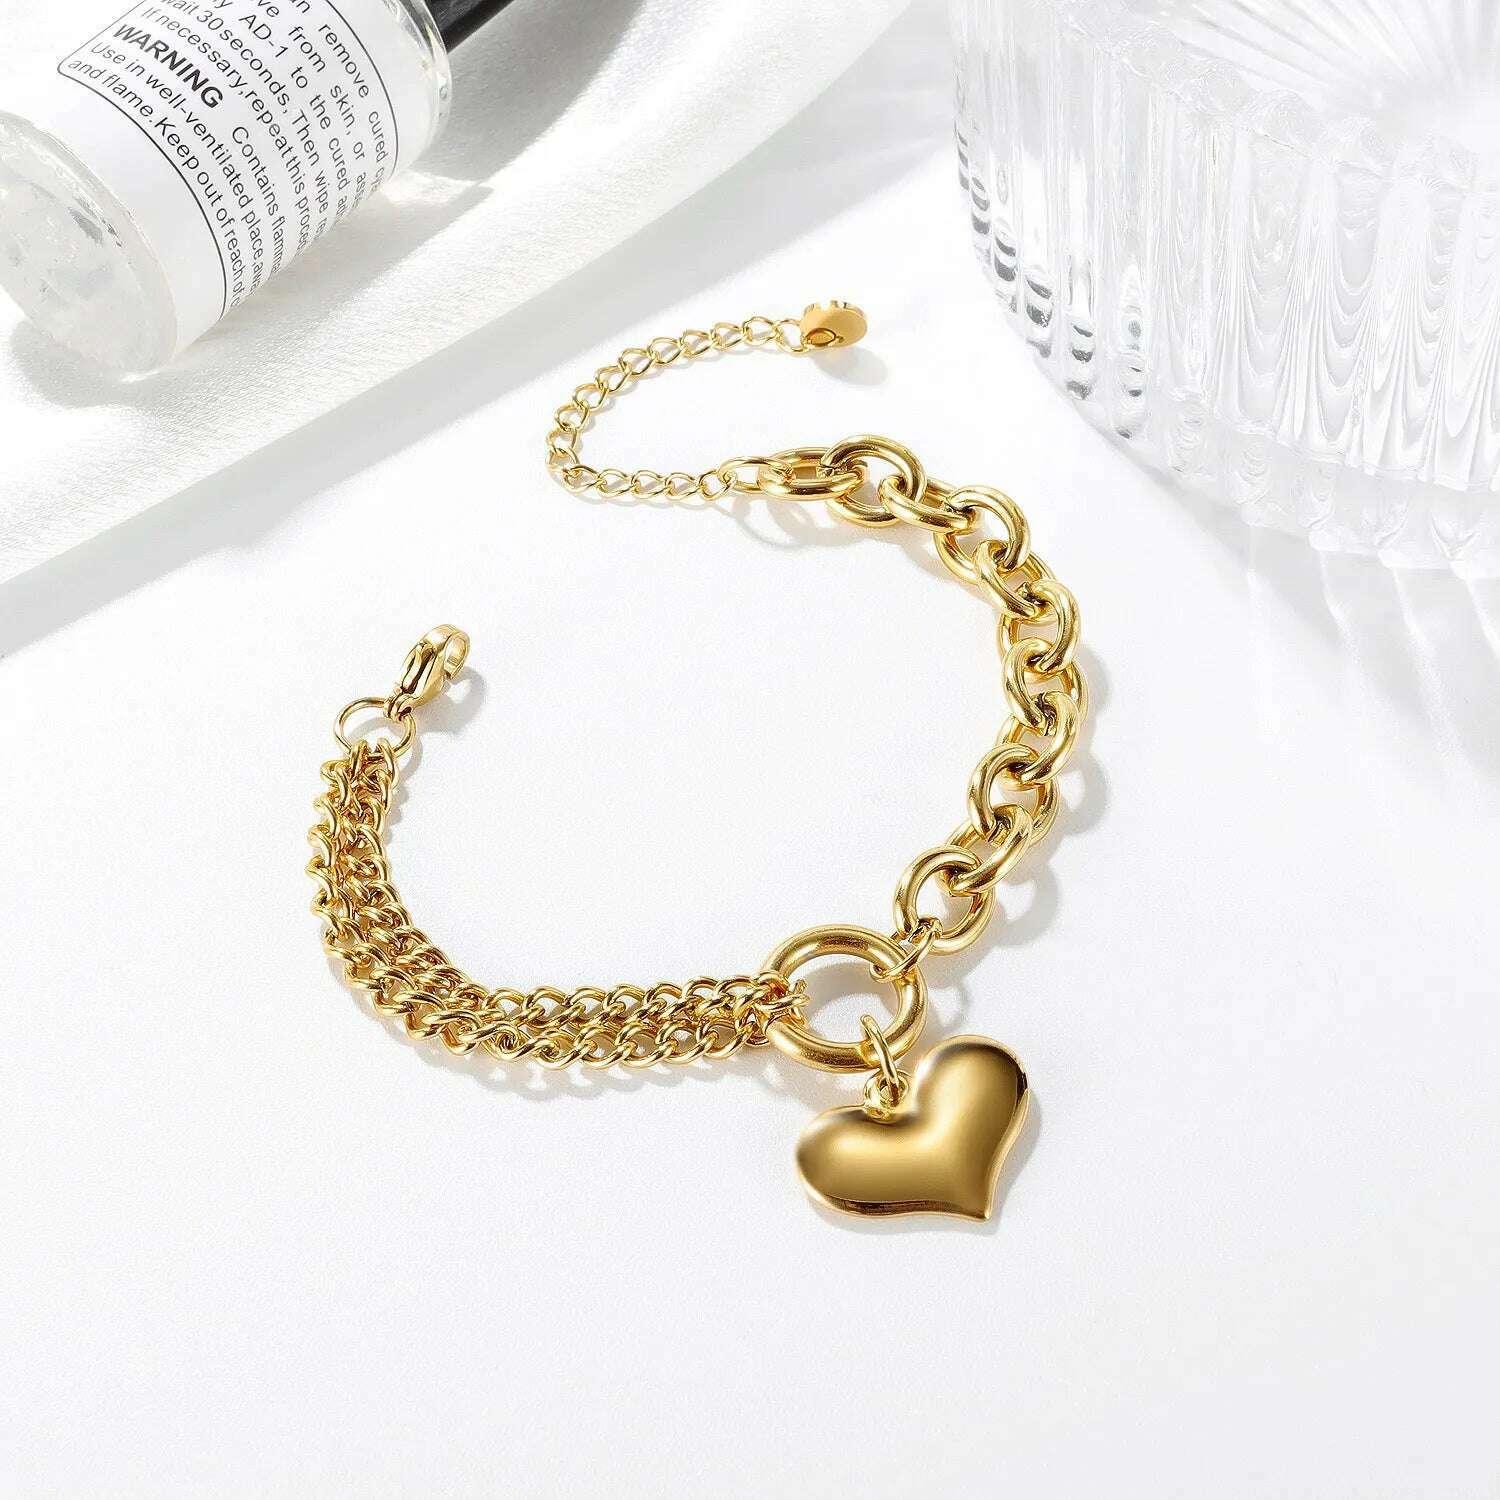 KIMLUD, Statement Heart Pendant Bracelet Stainless Steel Gold color Jewelry Fashion Metal Texture Bracelet Accessories 2023, KIMLUD Womens Clothes